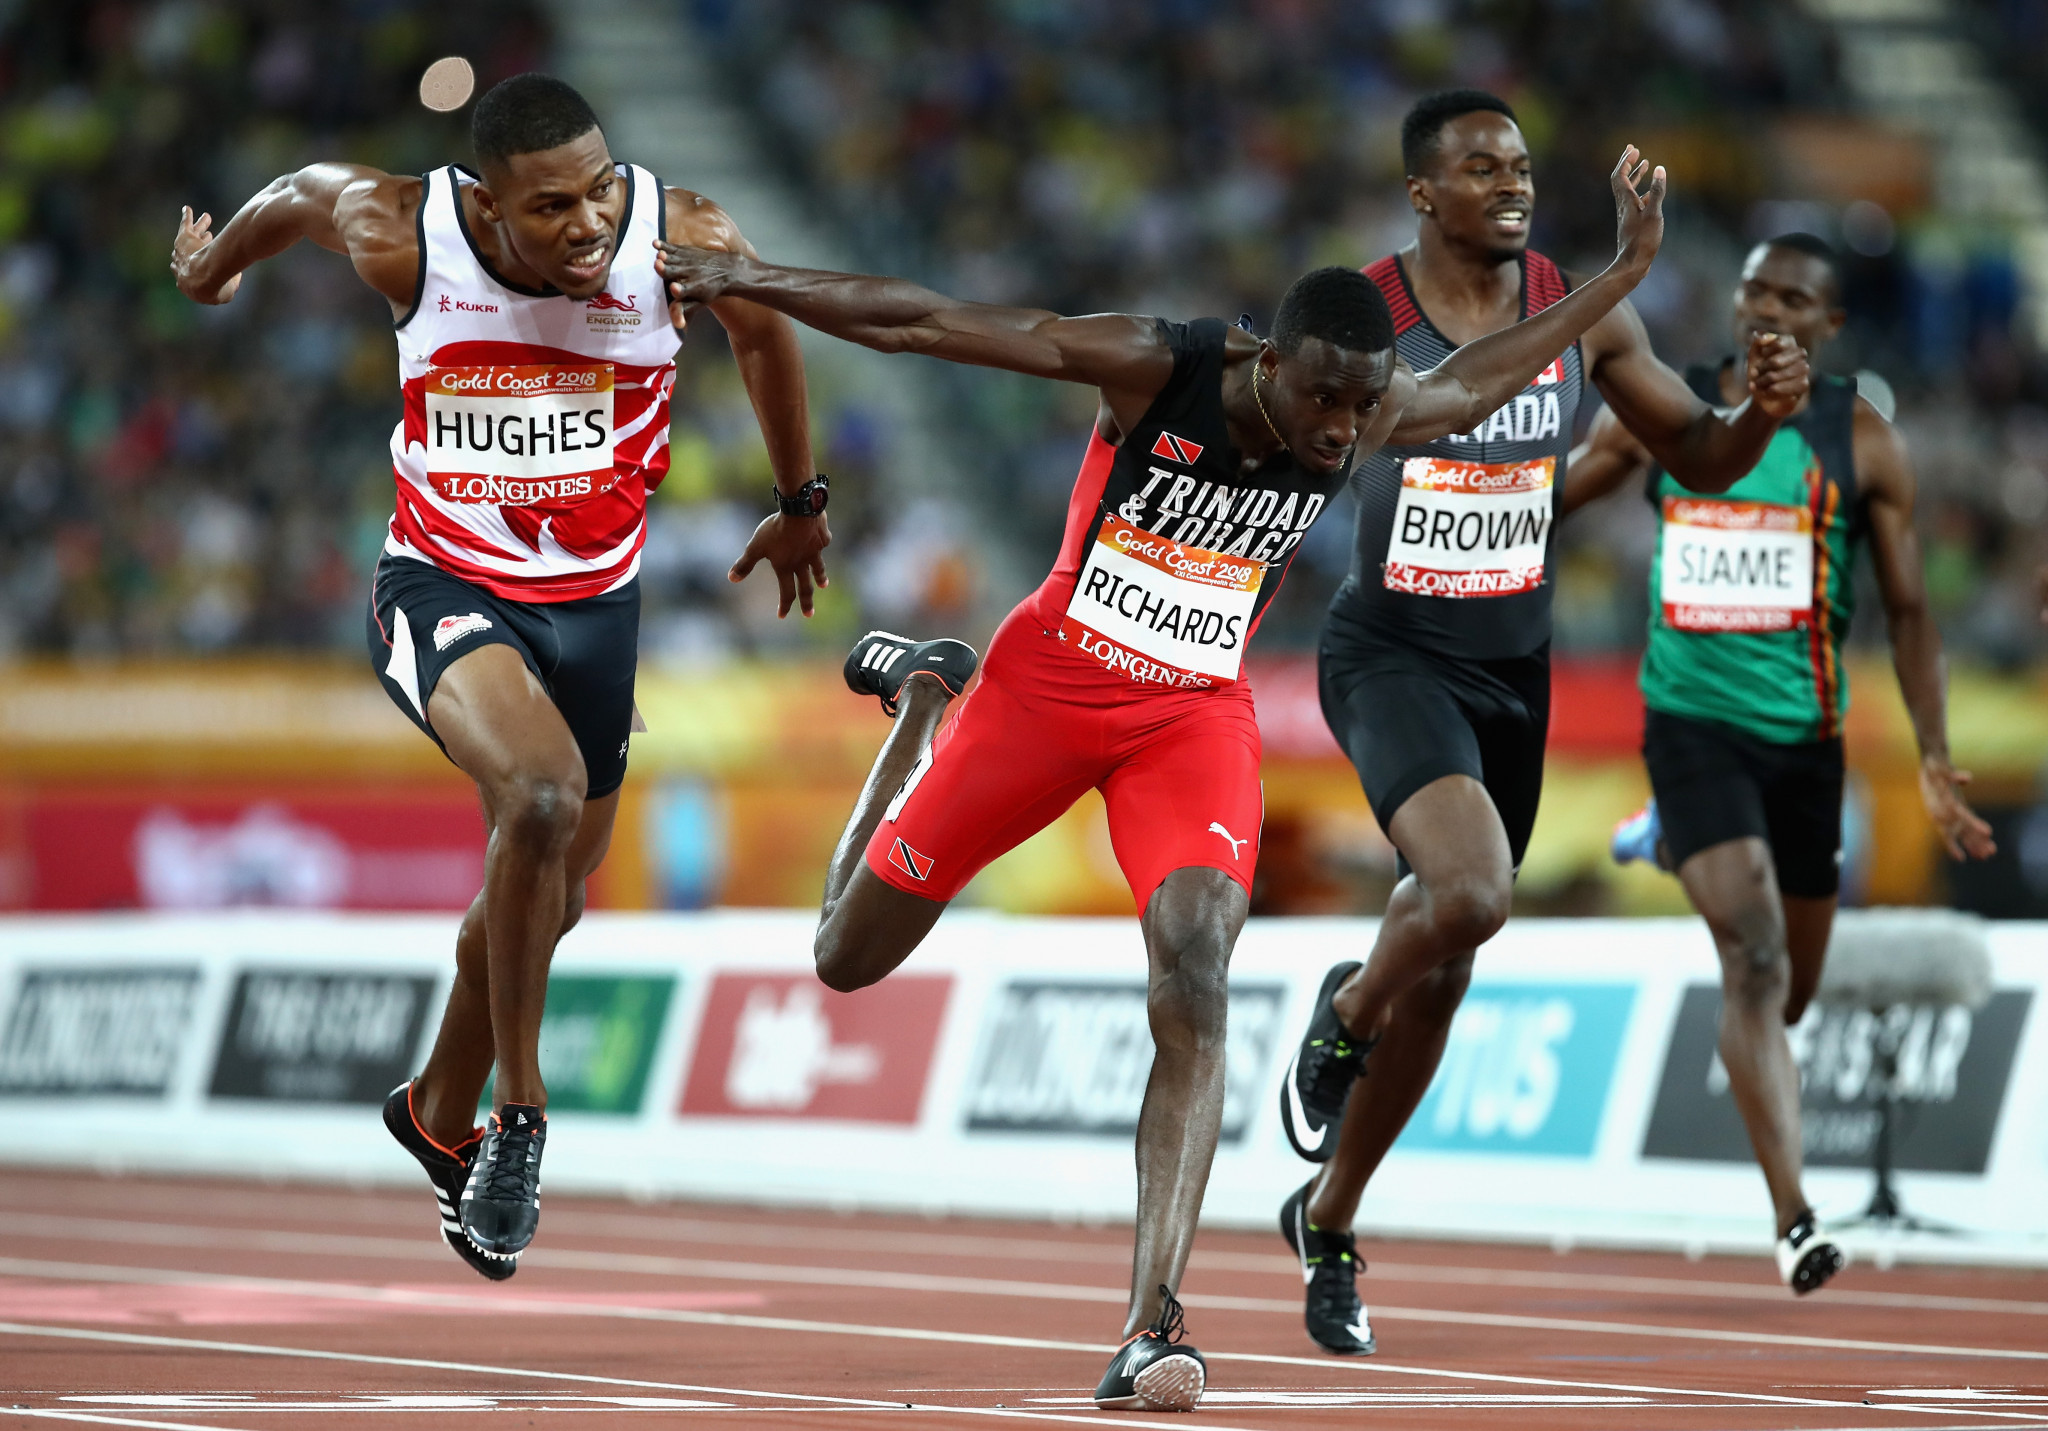 England's Zharnel Hughes claimed the men's 200m honours before he was later disqualified ©Getty Images